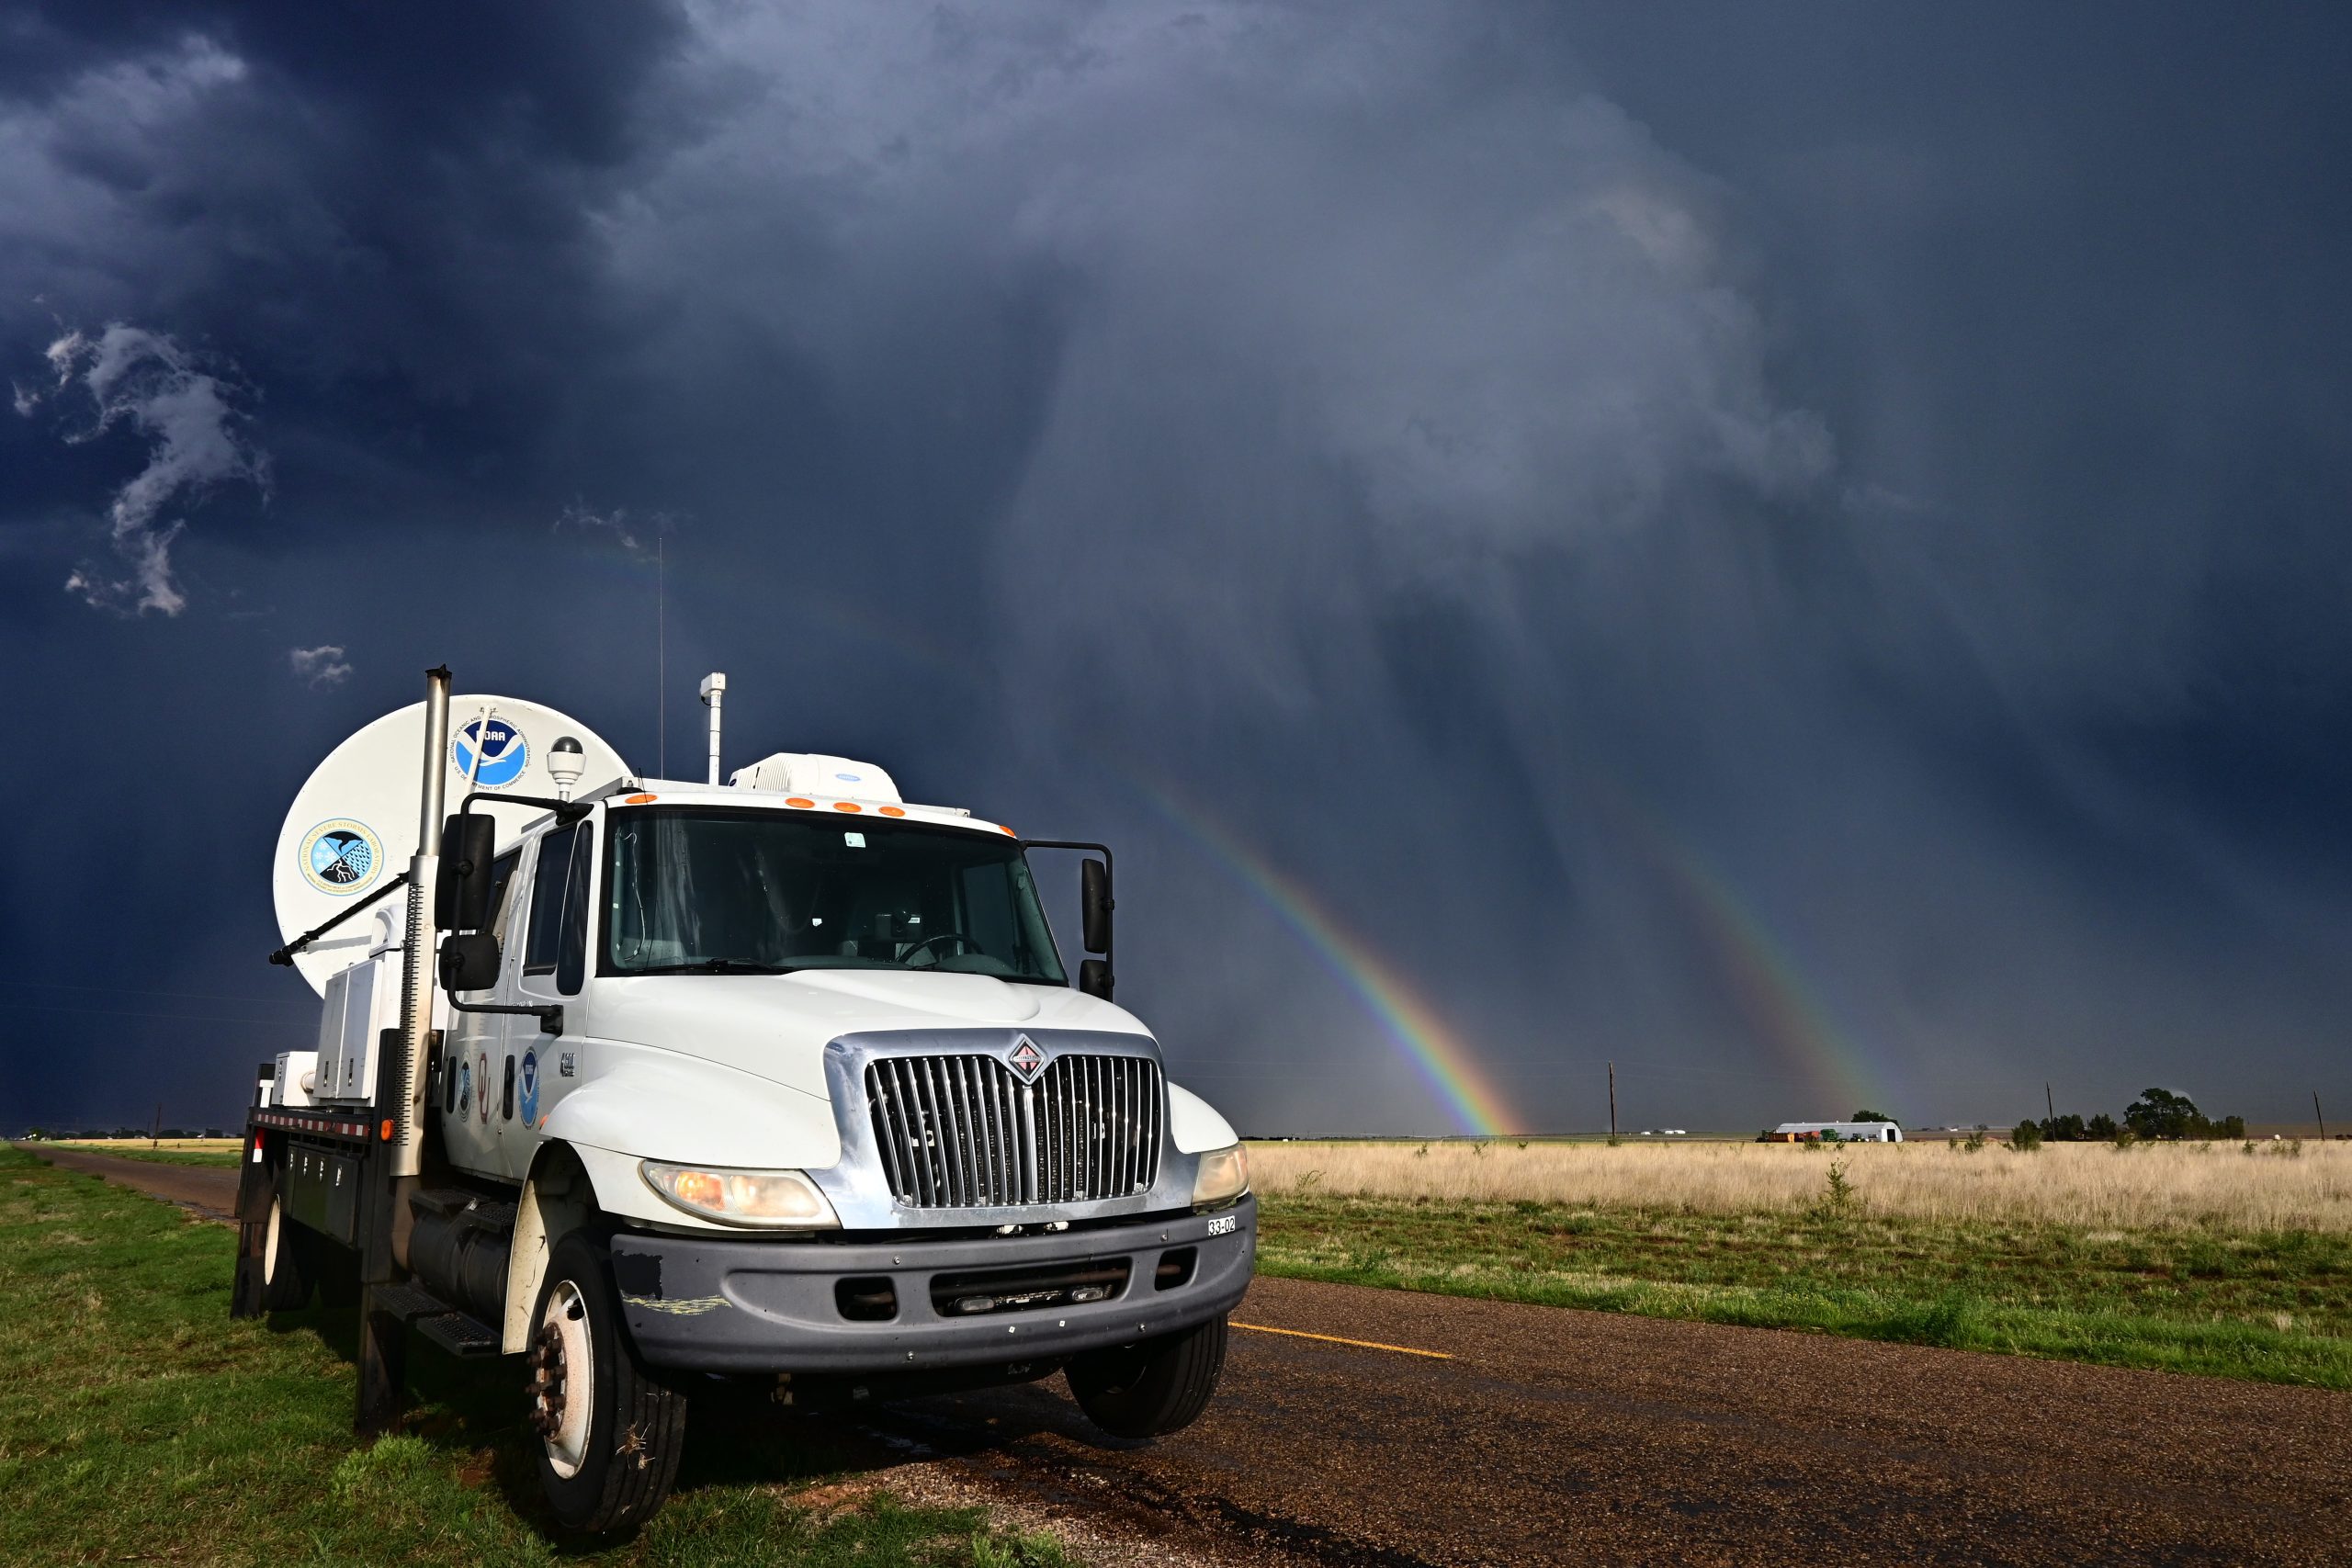 Mobile radar vehicle from NOAA NSSL with rainbows and stormy skies in the background.